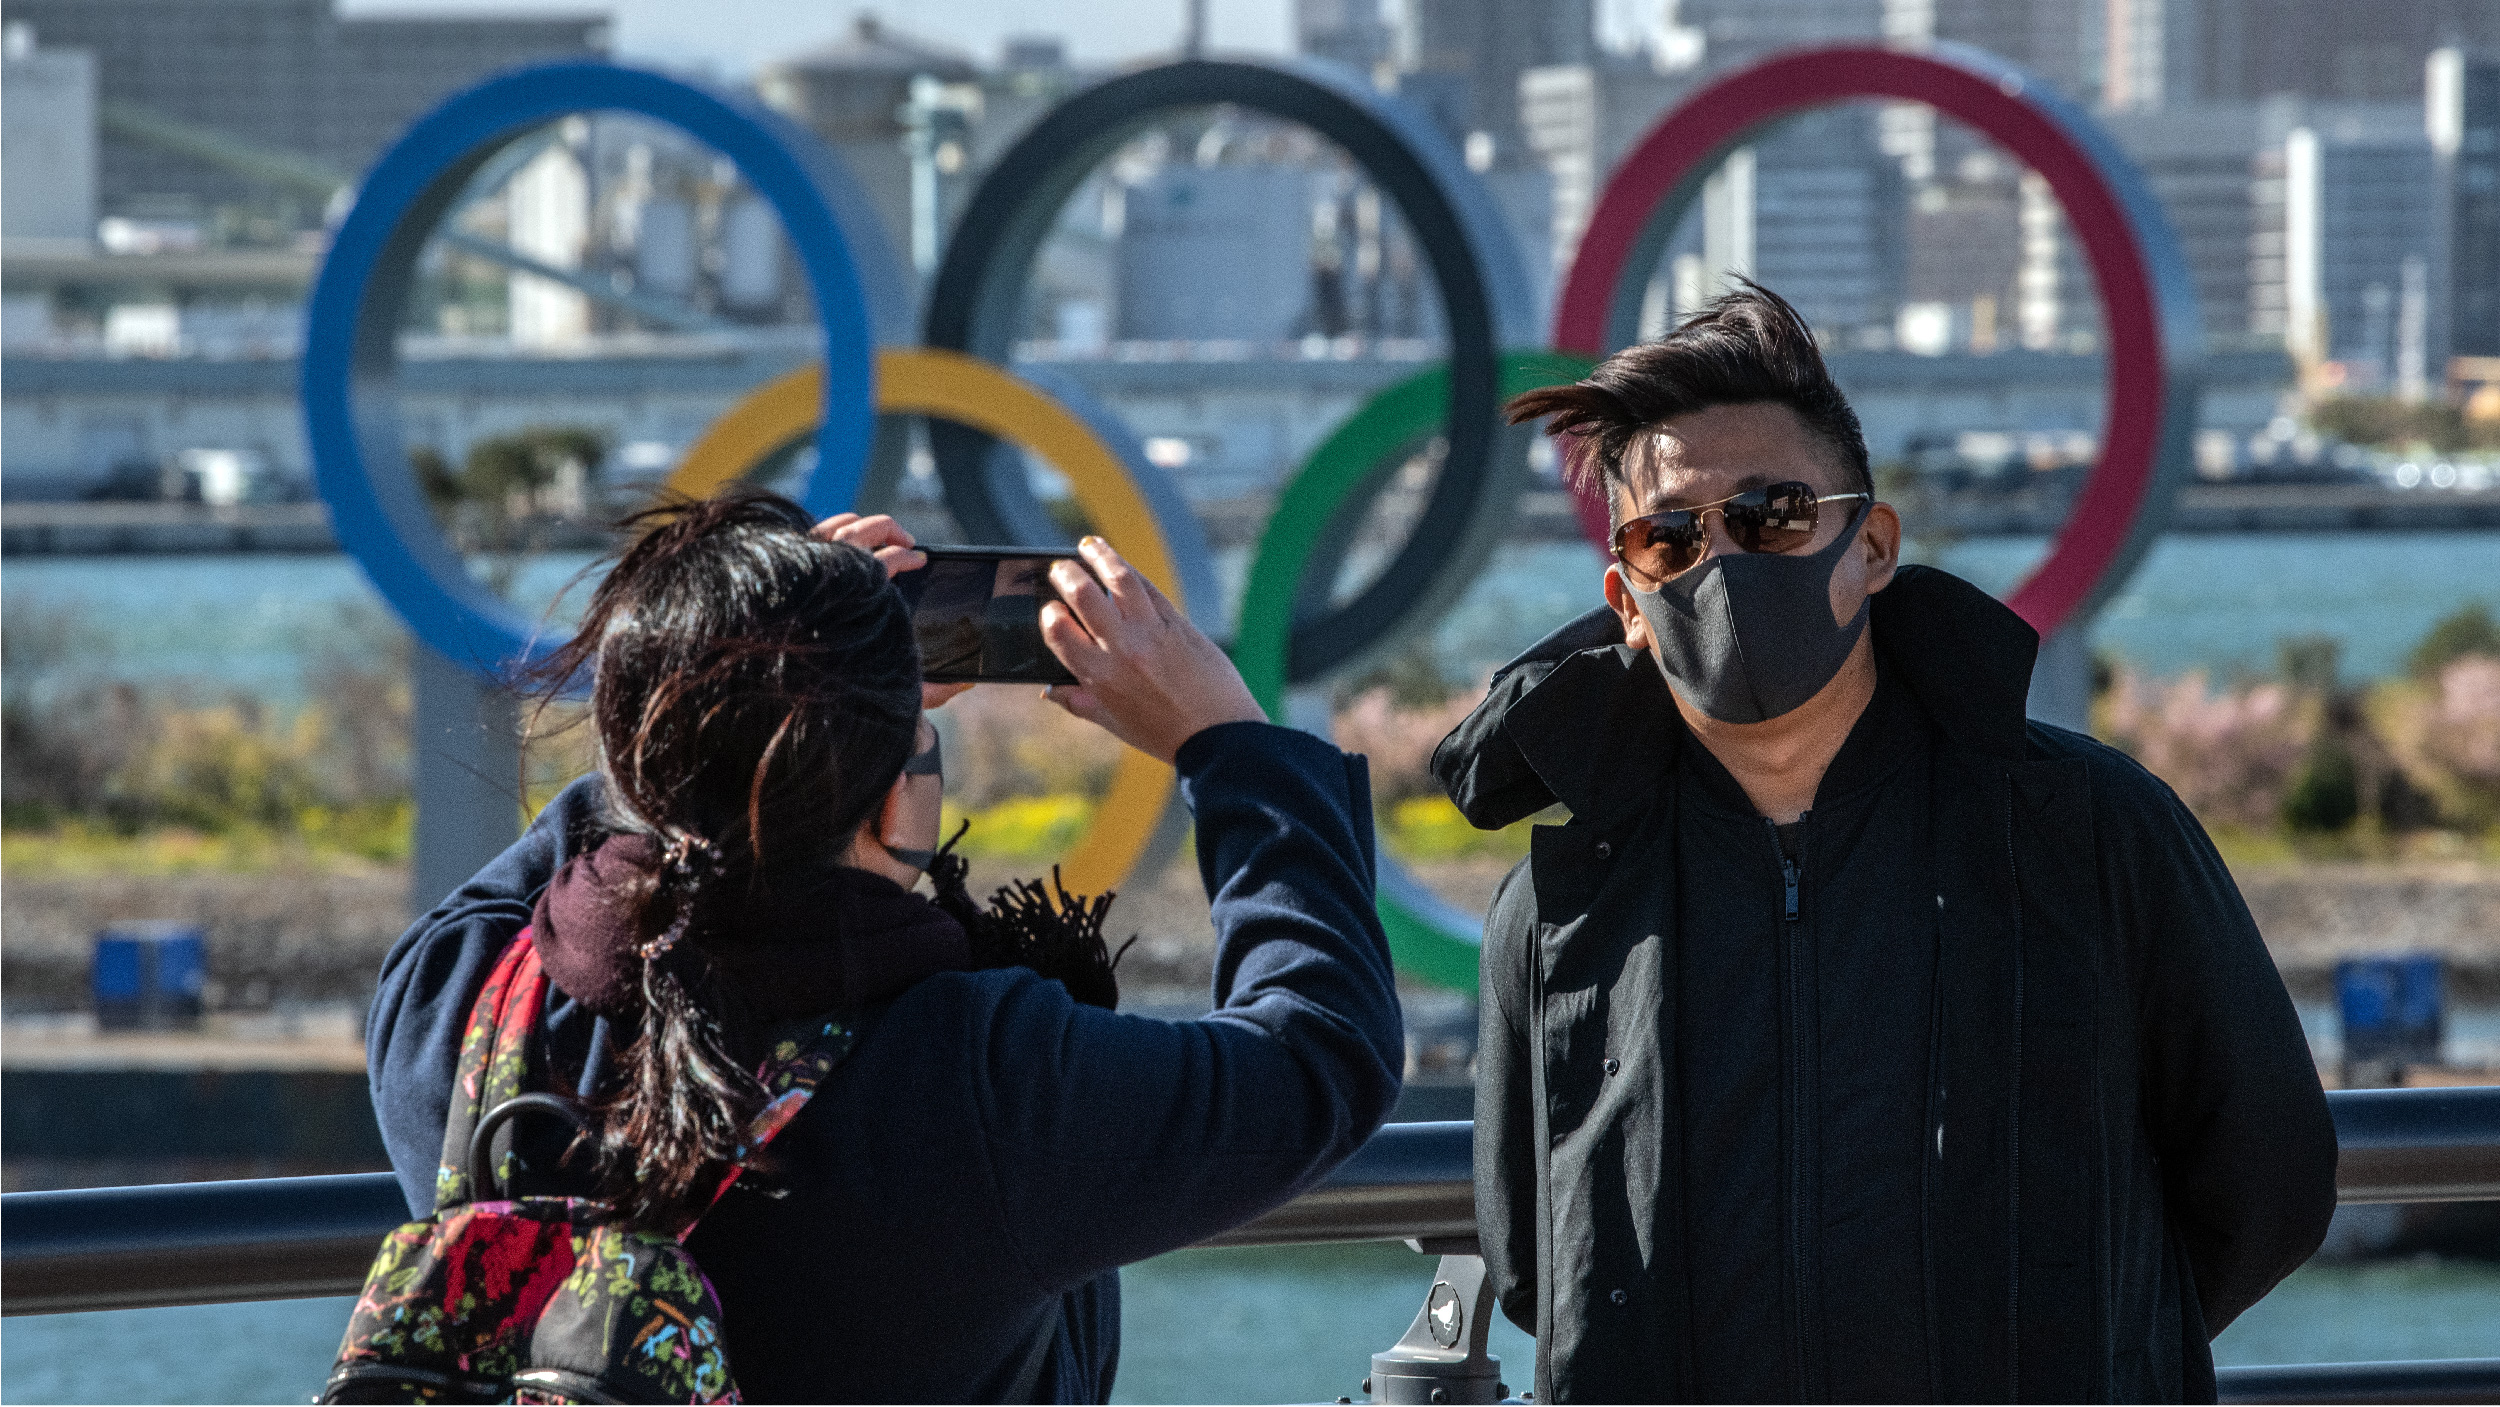 TOKYO, JAPAN - MARCH 05: A man wearing a face mask has his photograph taken in front of the Olympic Rings in Odaiba on March 5, 2020 in Tokyo, Japan. An increasing number of events and sporting fixtures are being cancelled or postponed around Japan while some businesses are closing or asking their employees or work from home as Covid-19 cases continue to grow and concerns mount over the possibility that the epidemic will force the postponement or even cancellation of the Tokyo Olympics. (Photo by Carl Court/Getty Images)